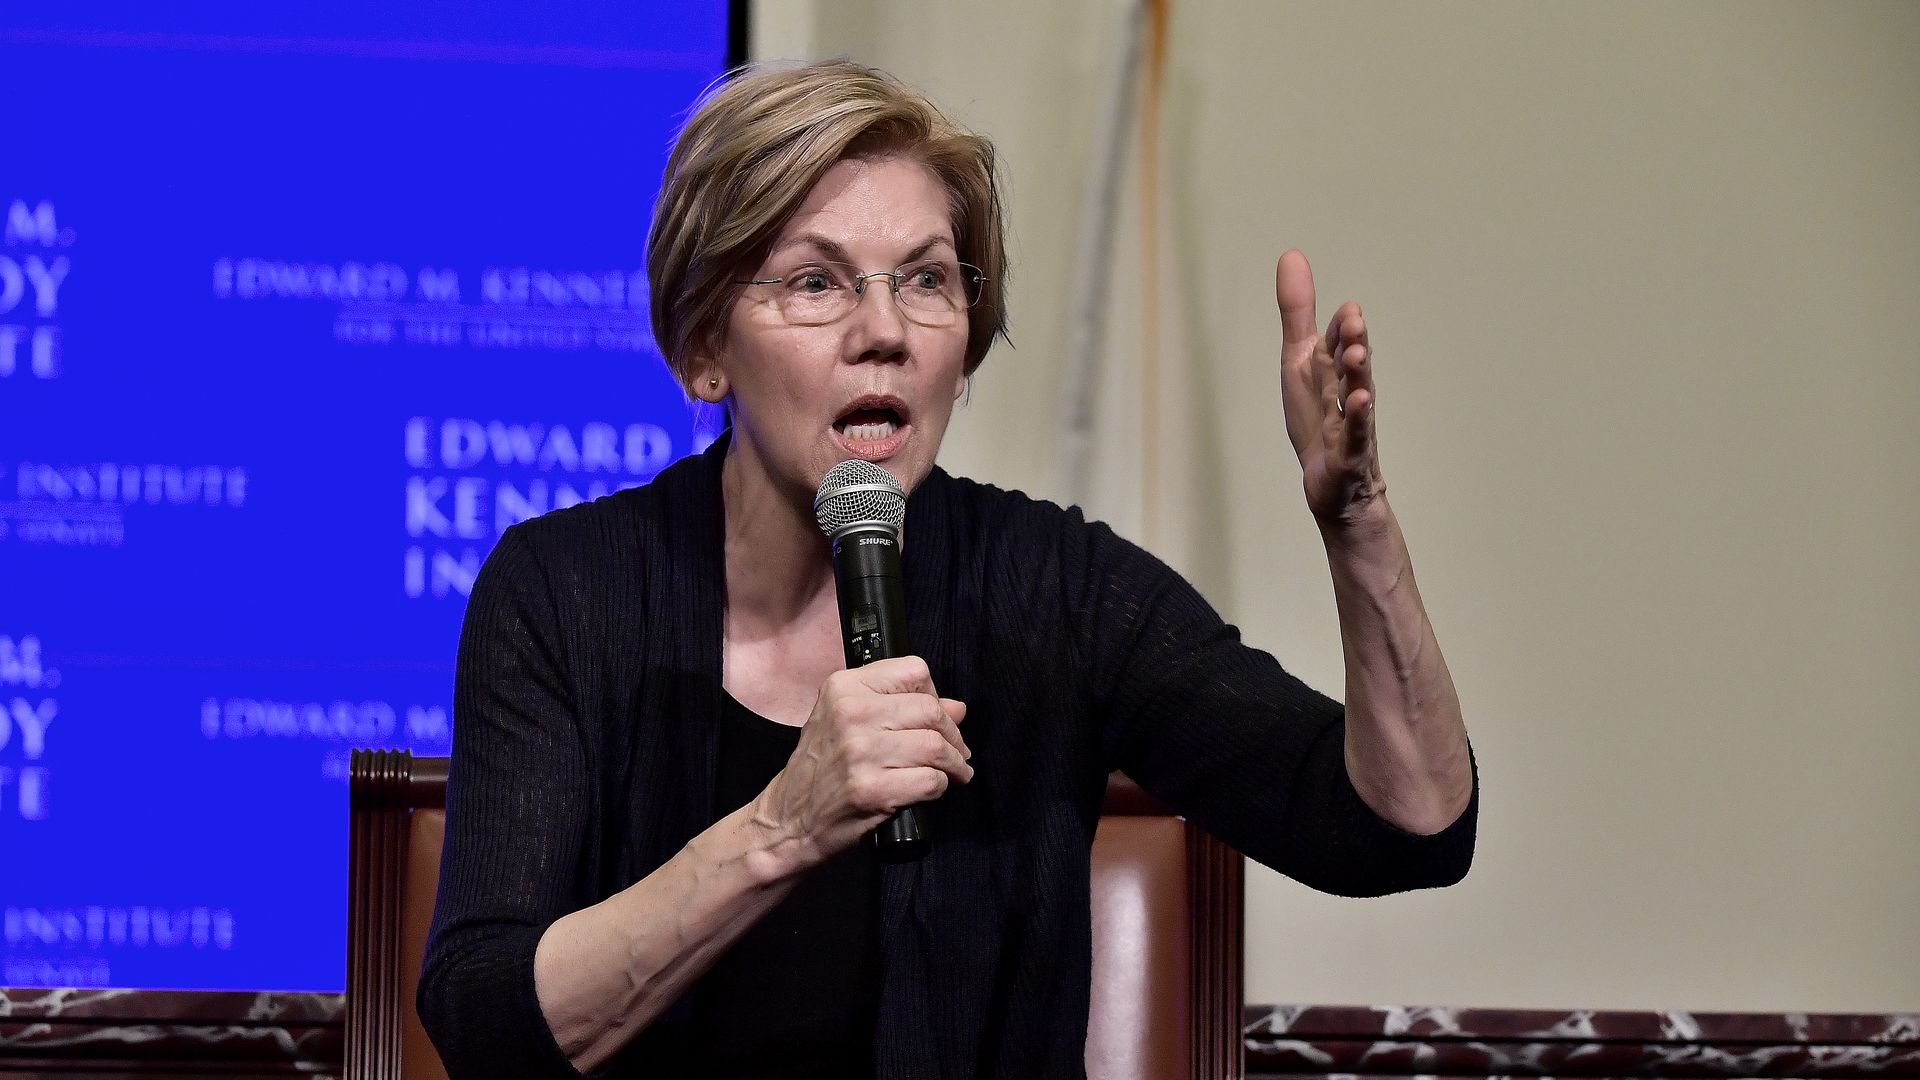 Senator Liz Warren gestures while holding a microphone, wearing black, before a blue and white background.